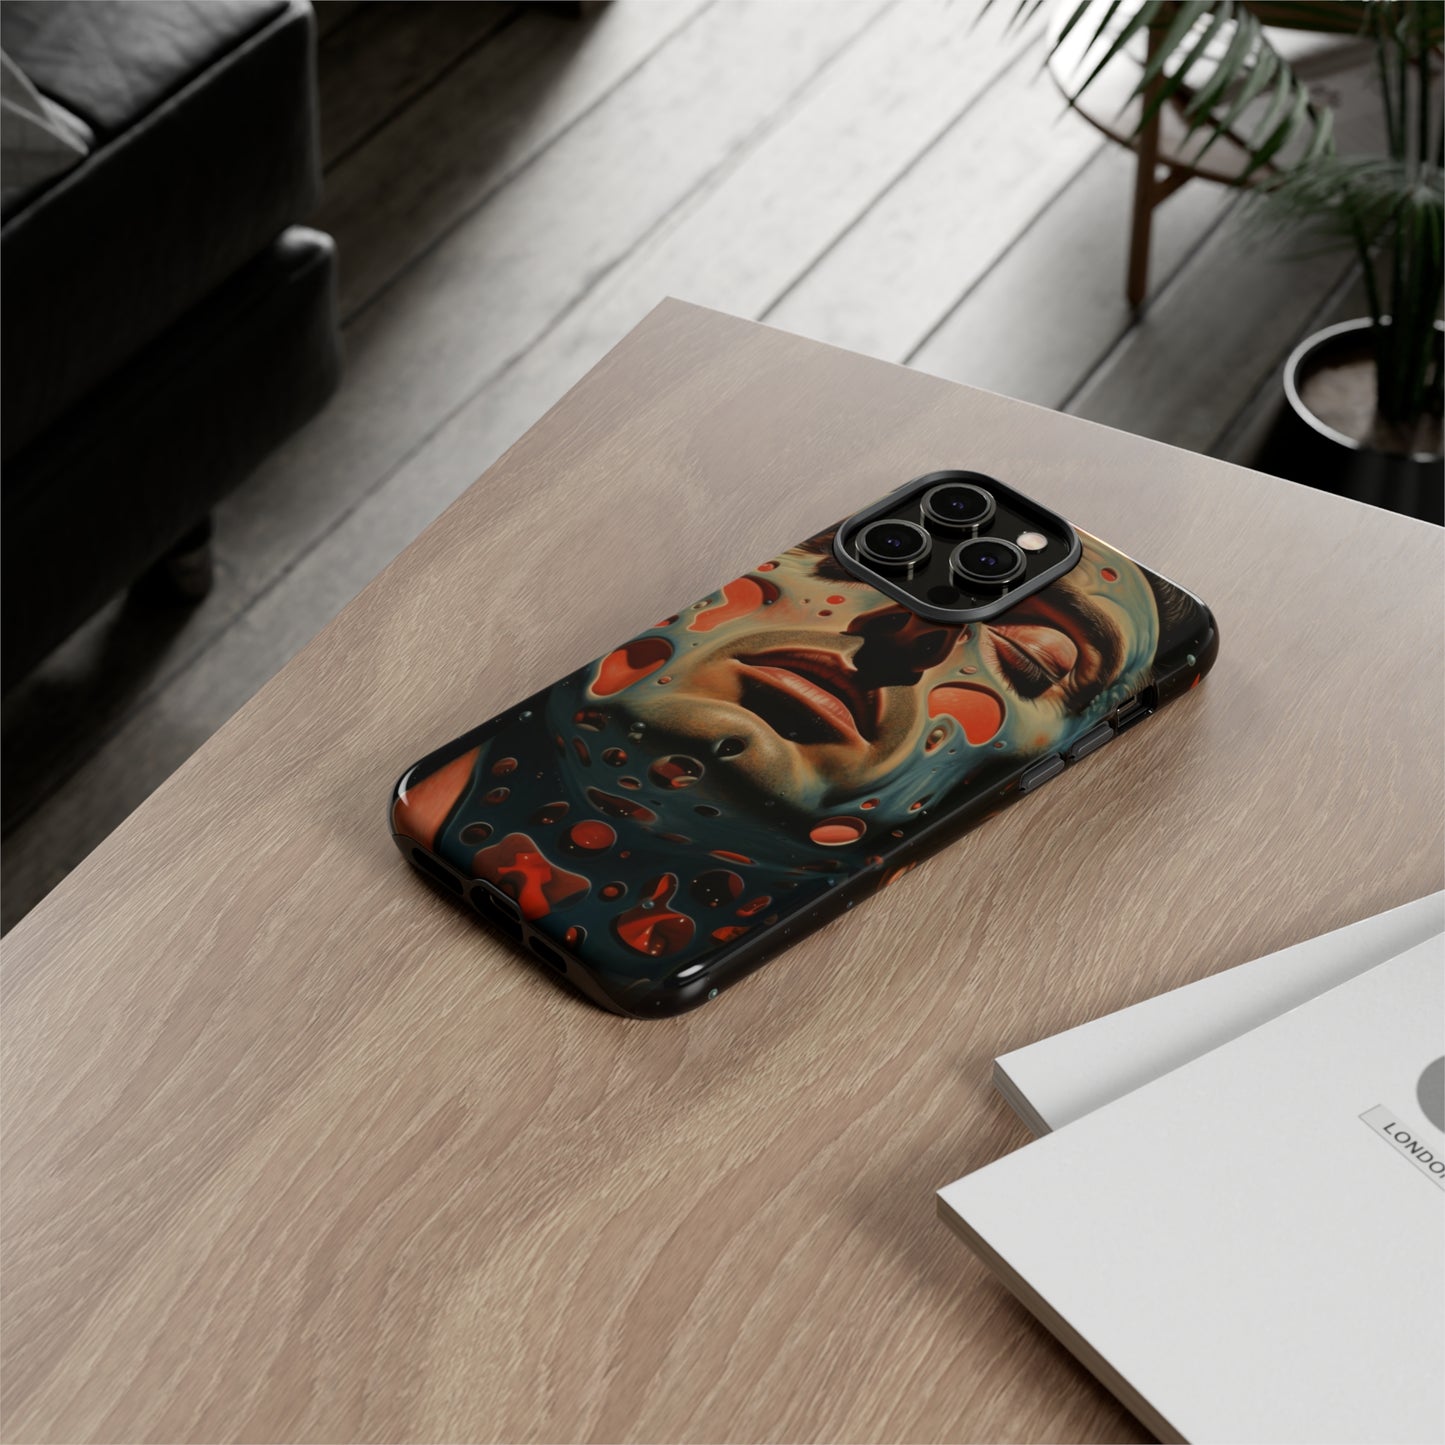 Starry Gaze: Glossy Dual-Layer Surrealism Design Protective Case for iPhone, Samsung, Google Pixel